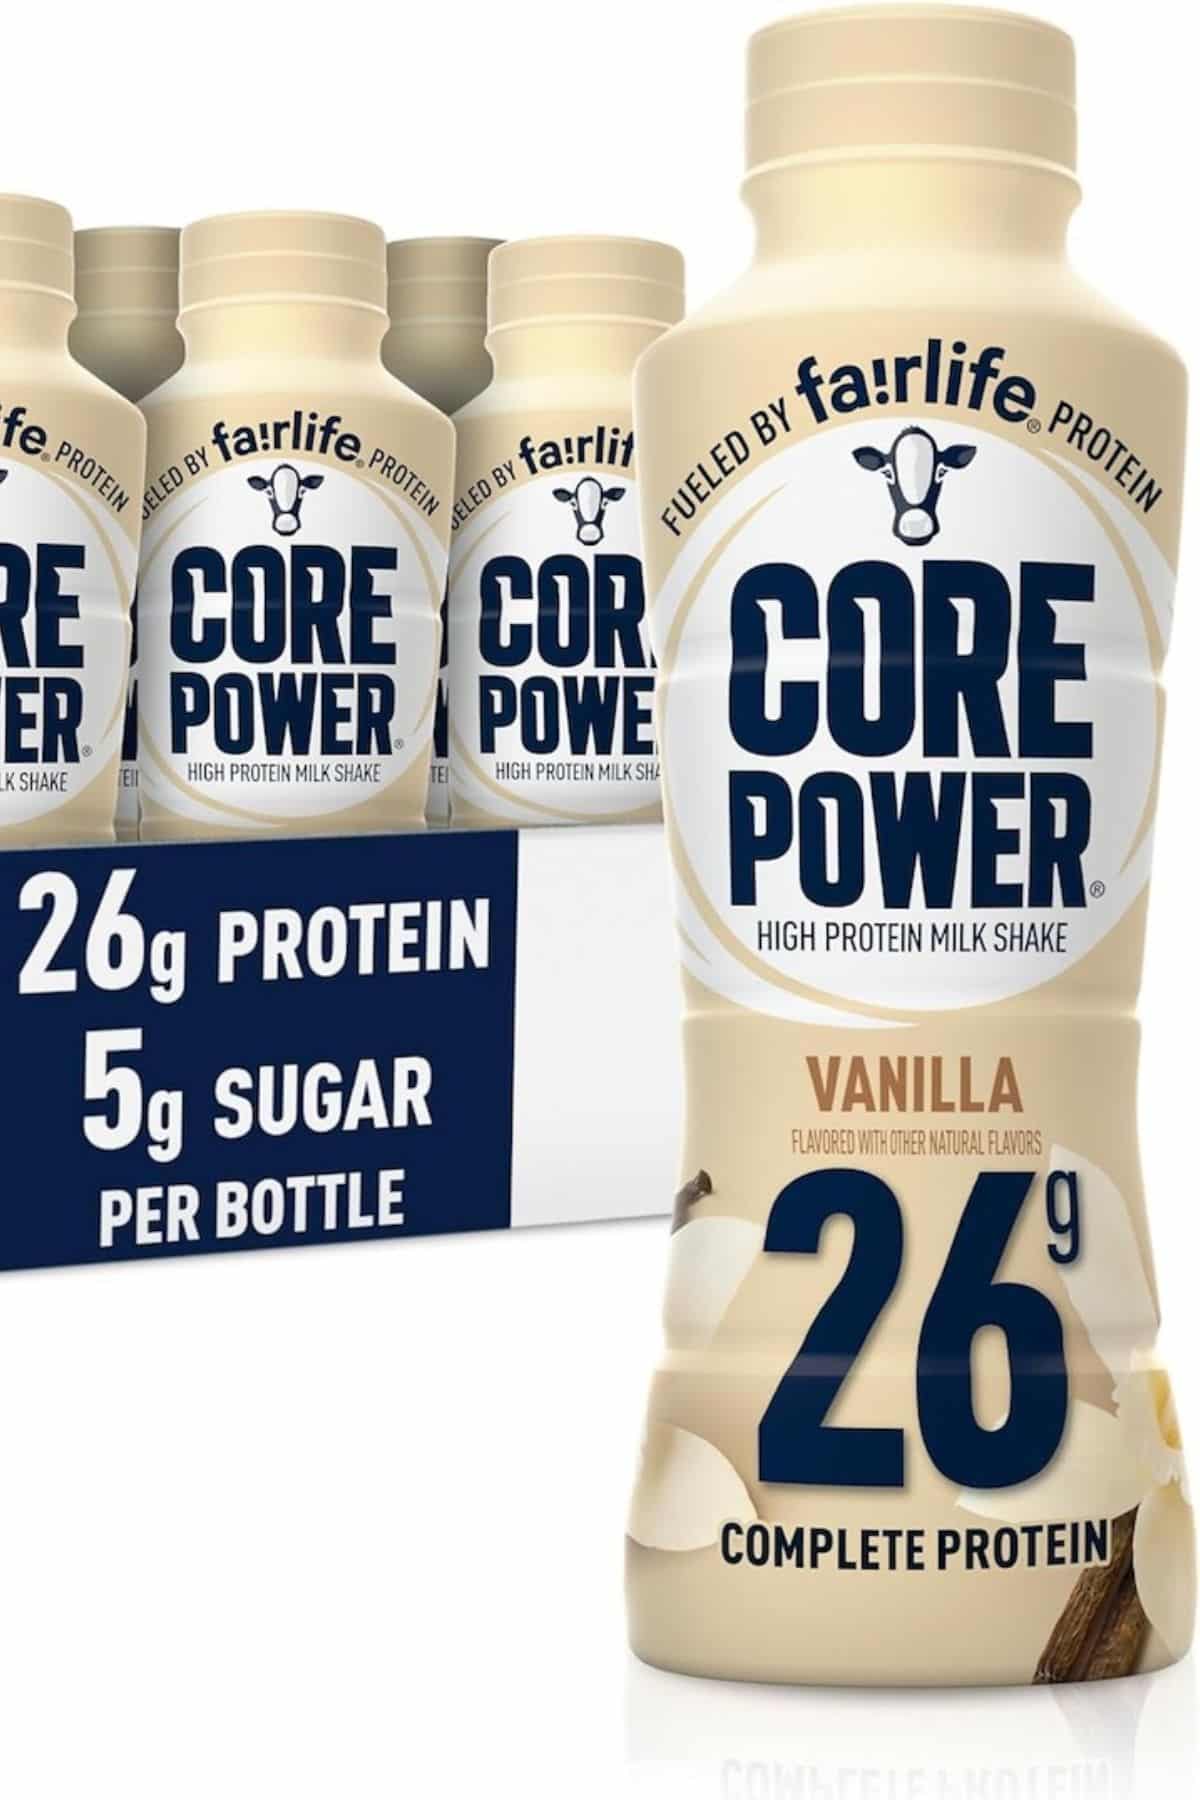 a bottle of Fairlife Core Power Protein drink in front of a box of several other bottles.